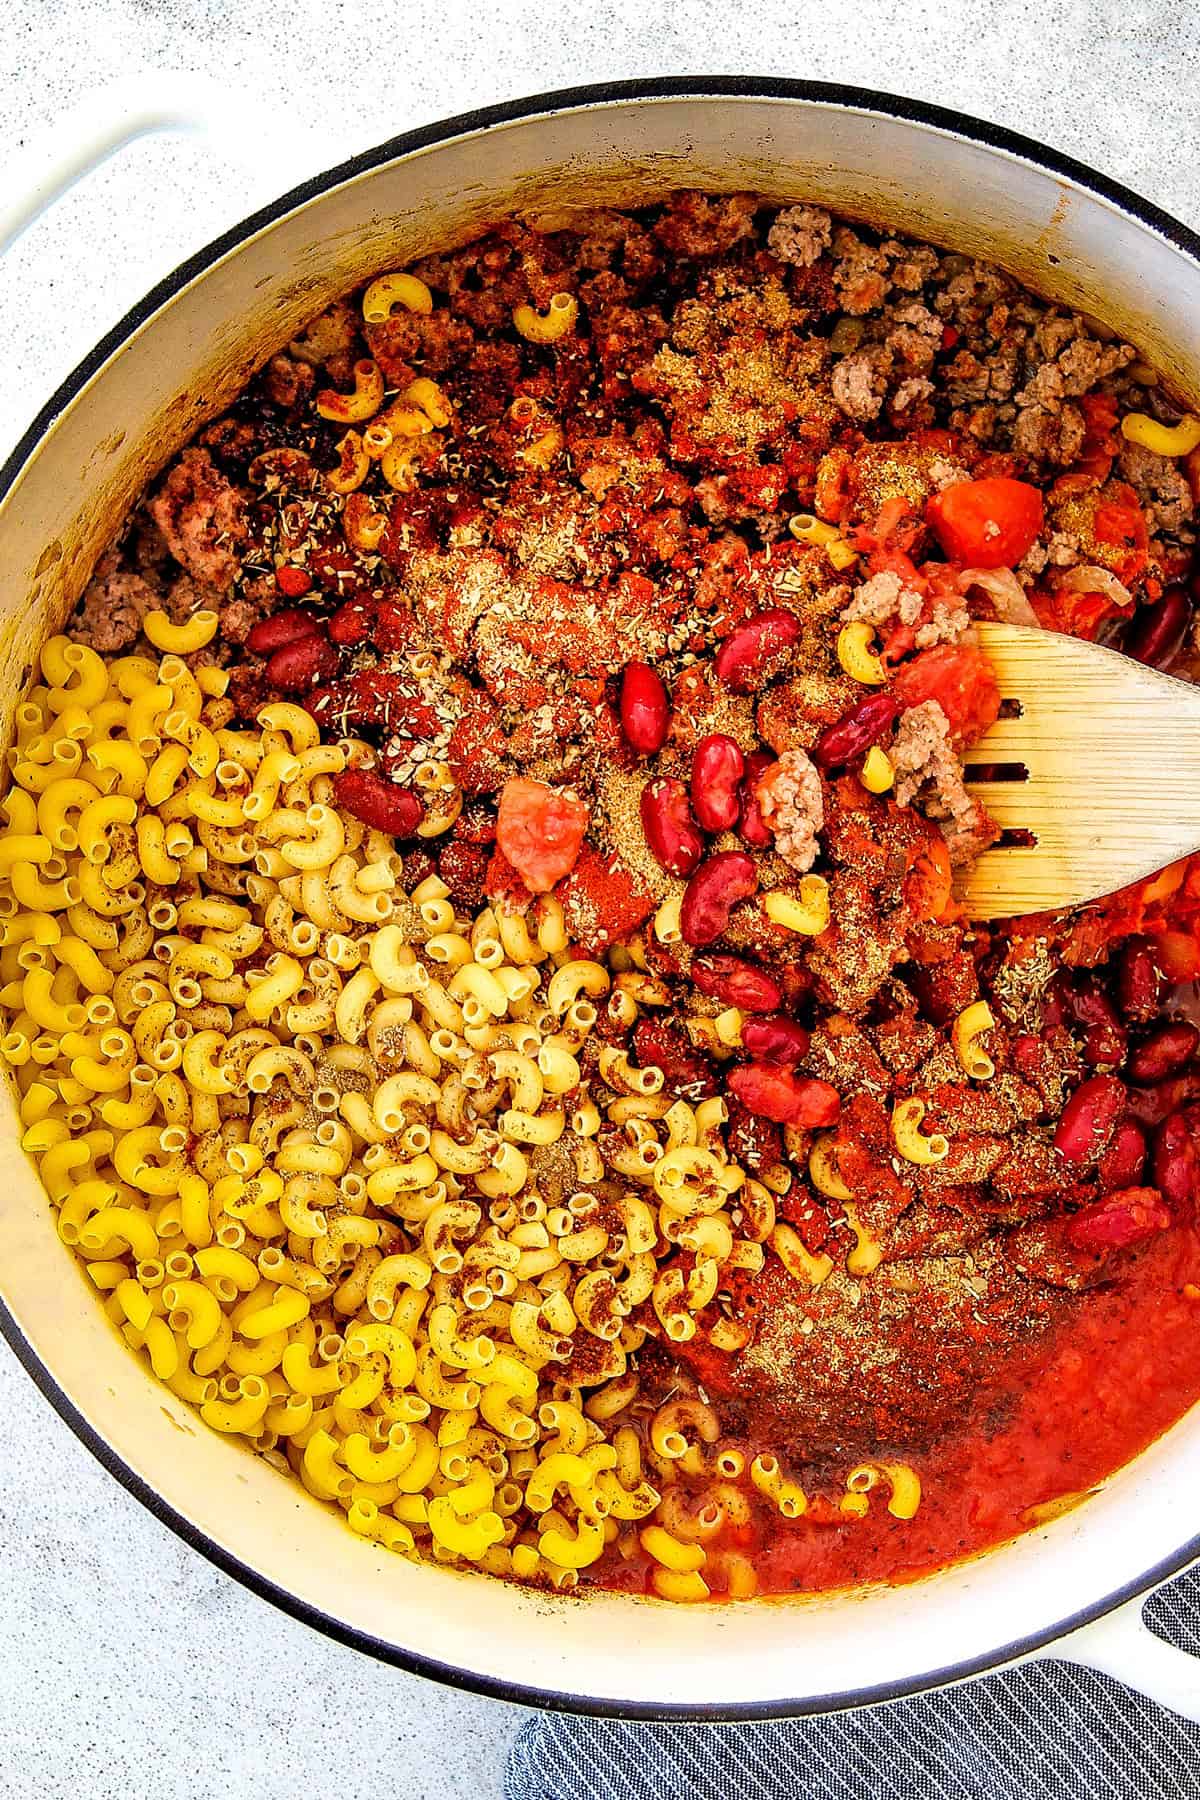 top view showing ingredients for chili mac:  ground beef, macaroni, kidney beans, crushed tomatoes, diced tomatoes, seasonings